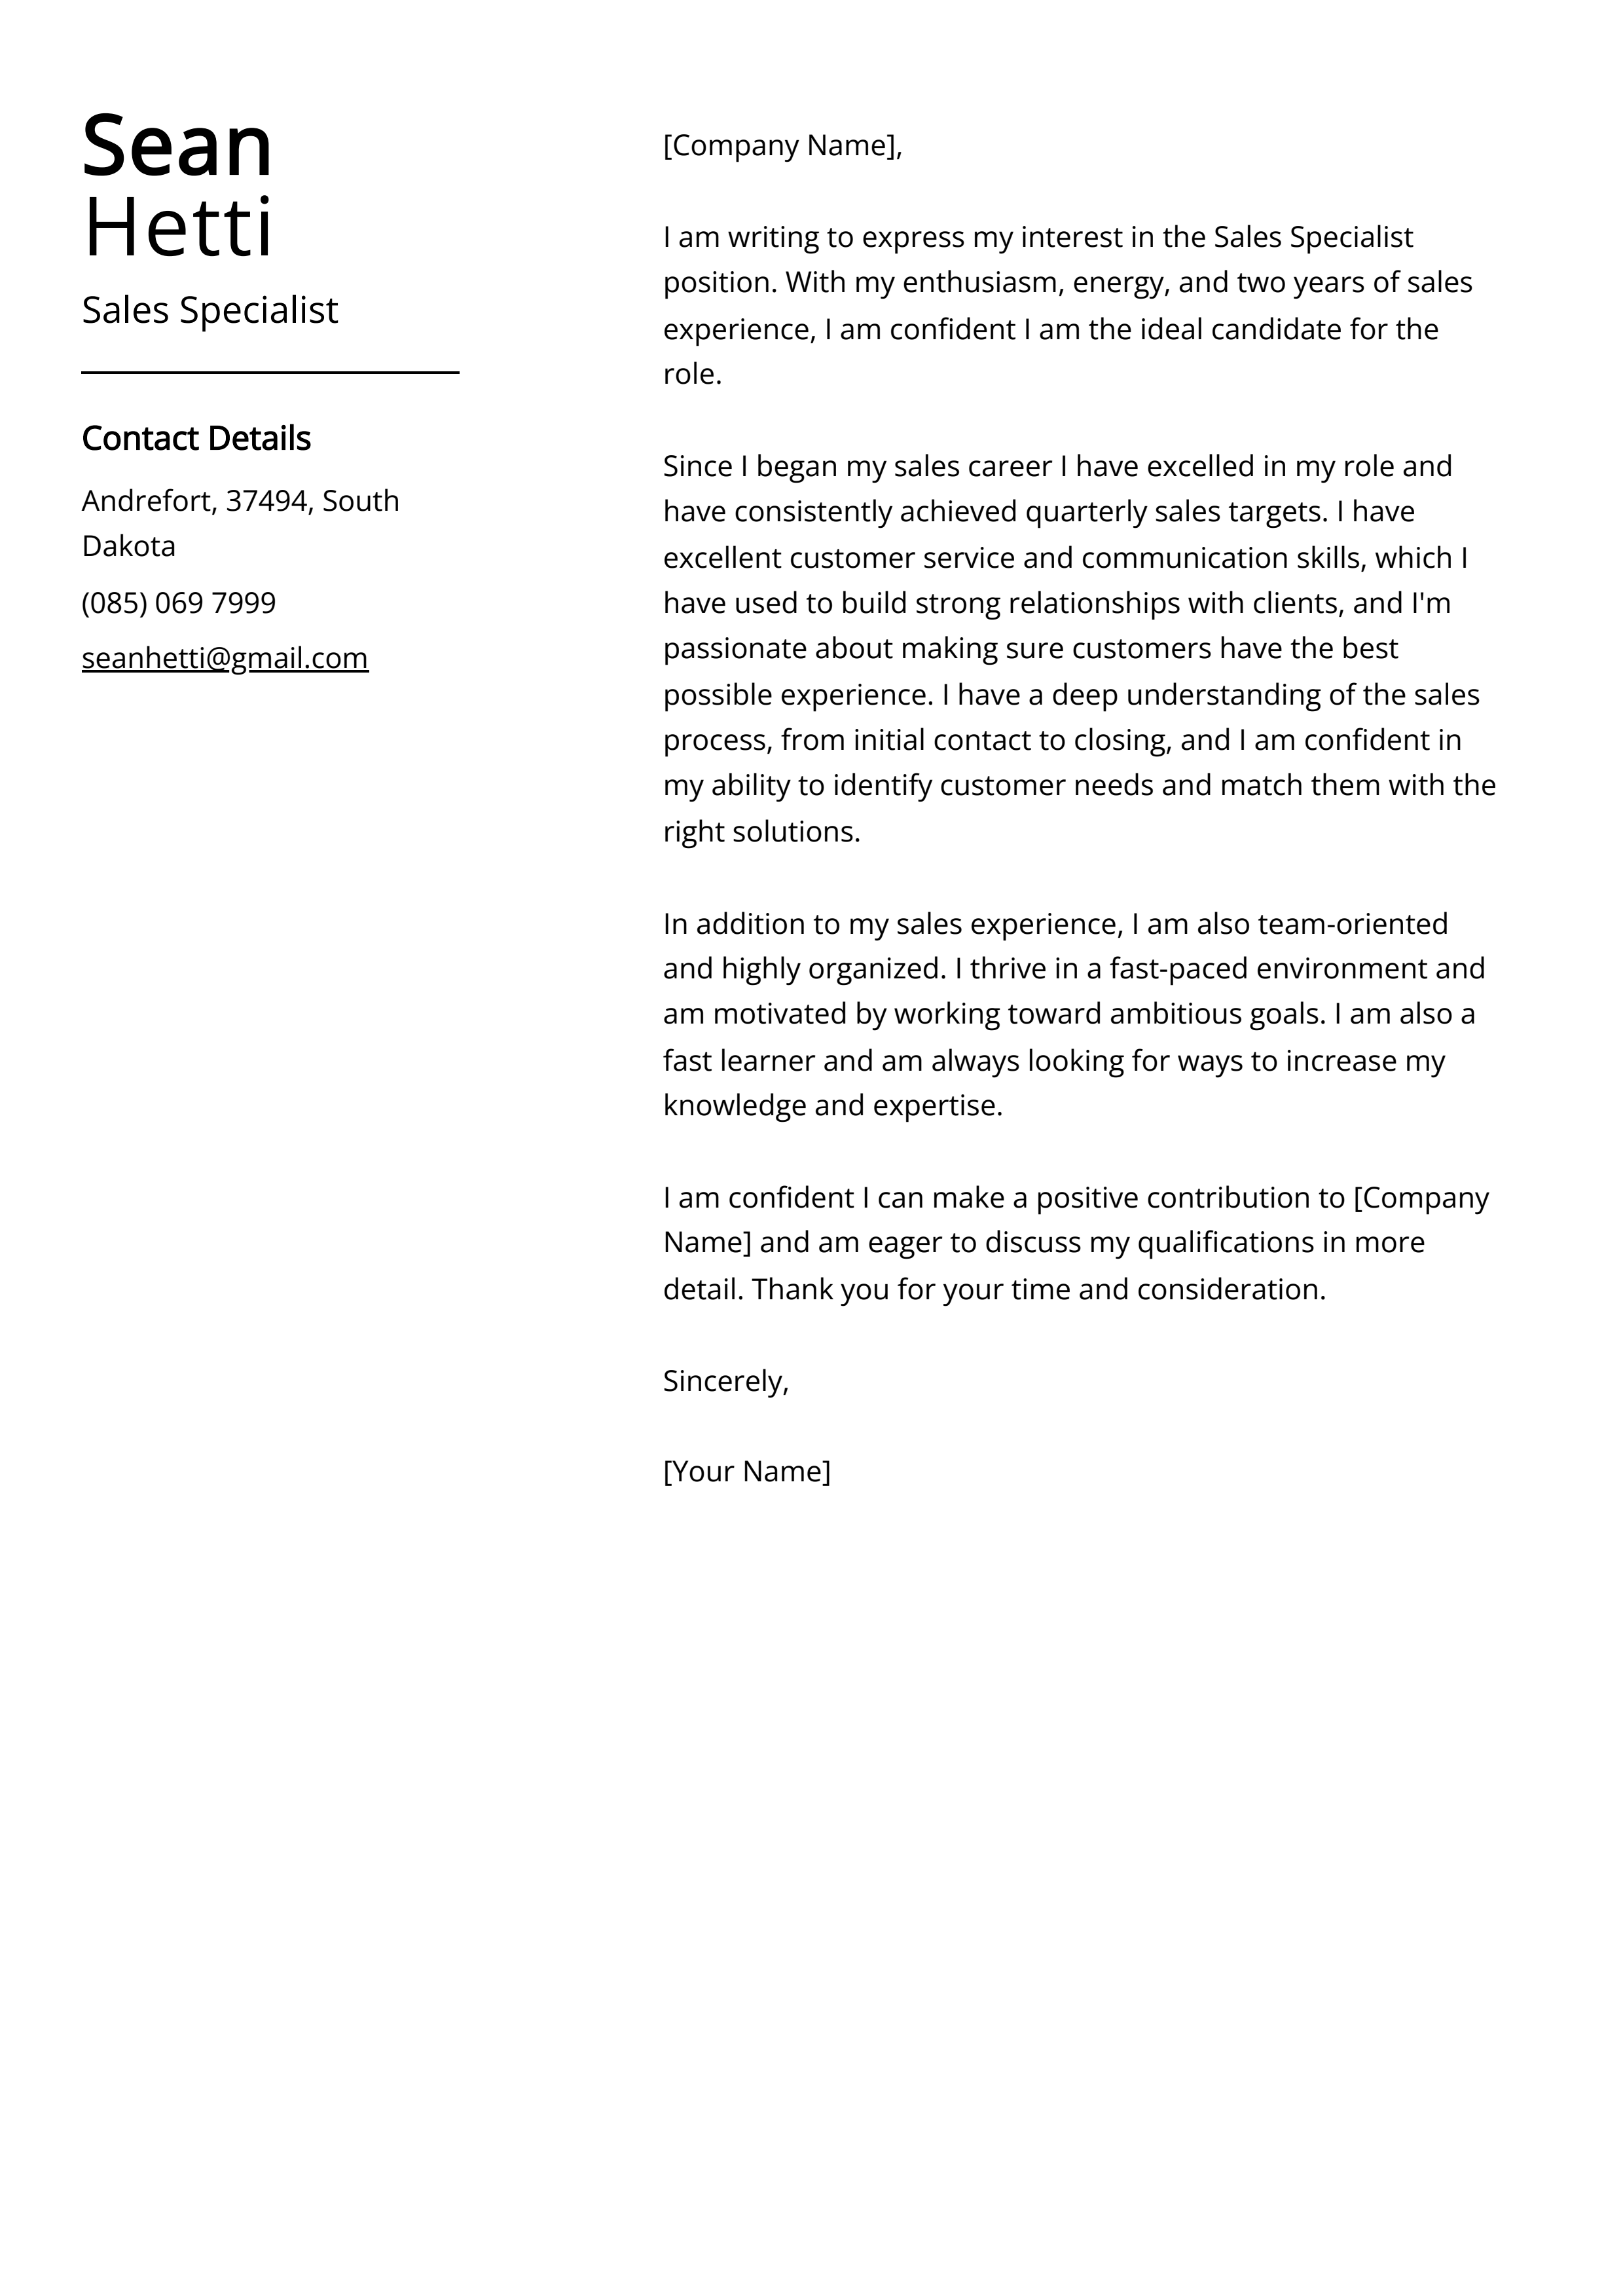 Sales Specialist Cover Letter Example